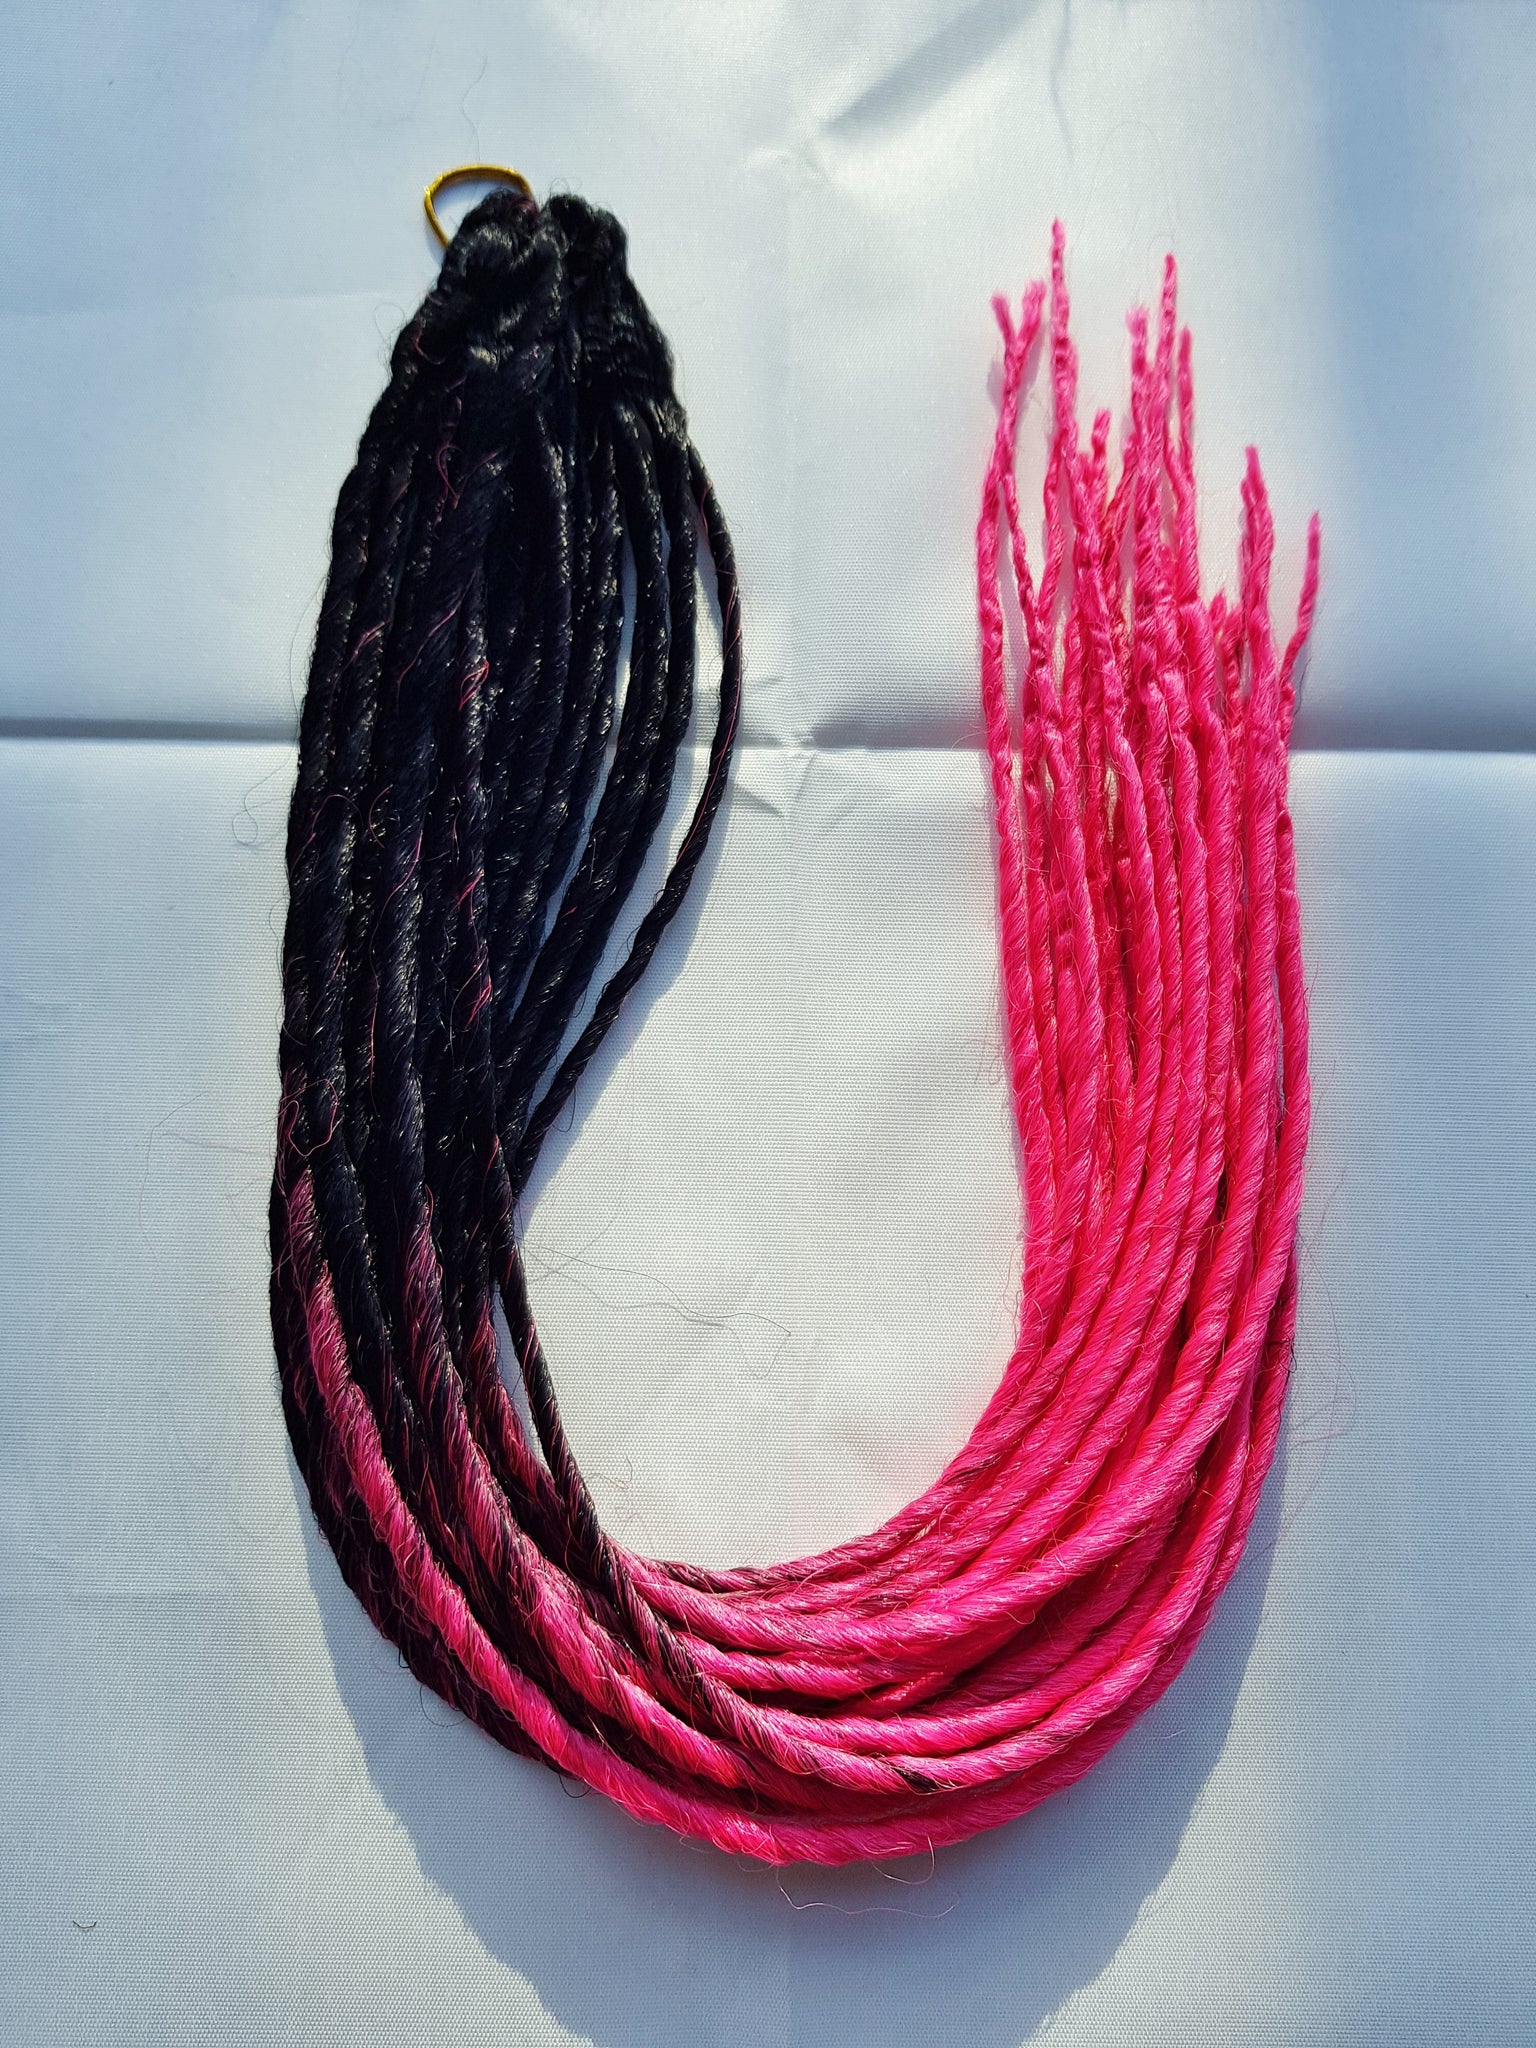 Elysee Star - Black Peach Pink Transitional Synthetic Dreadlocks (Double Ended) 100g